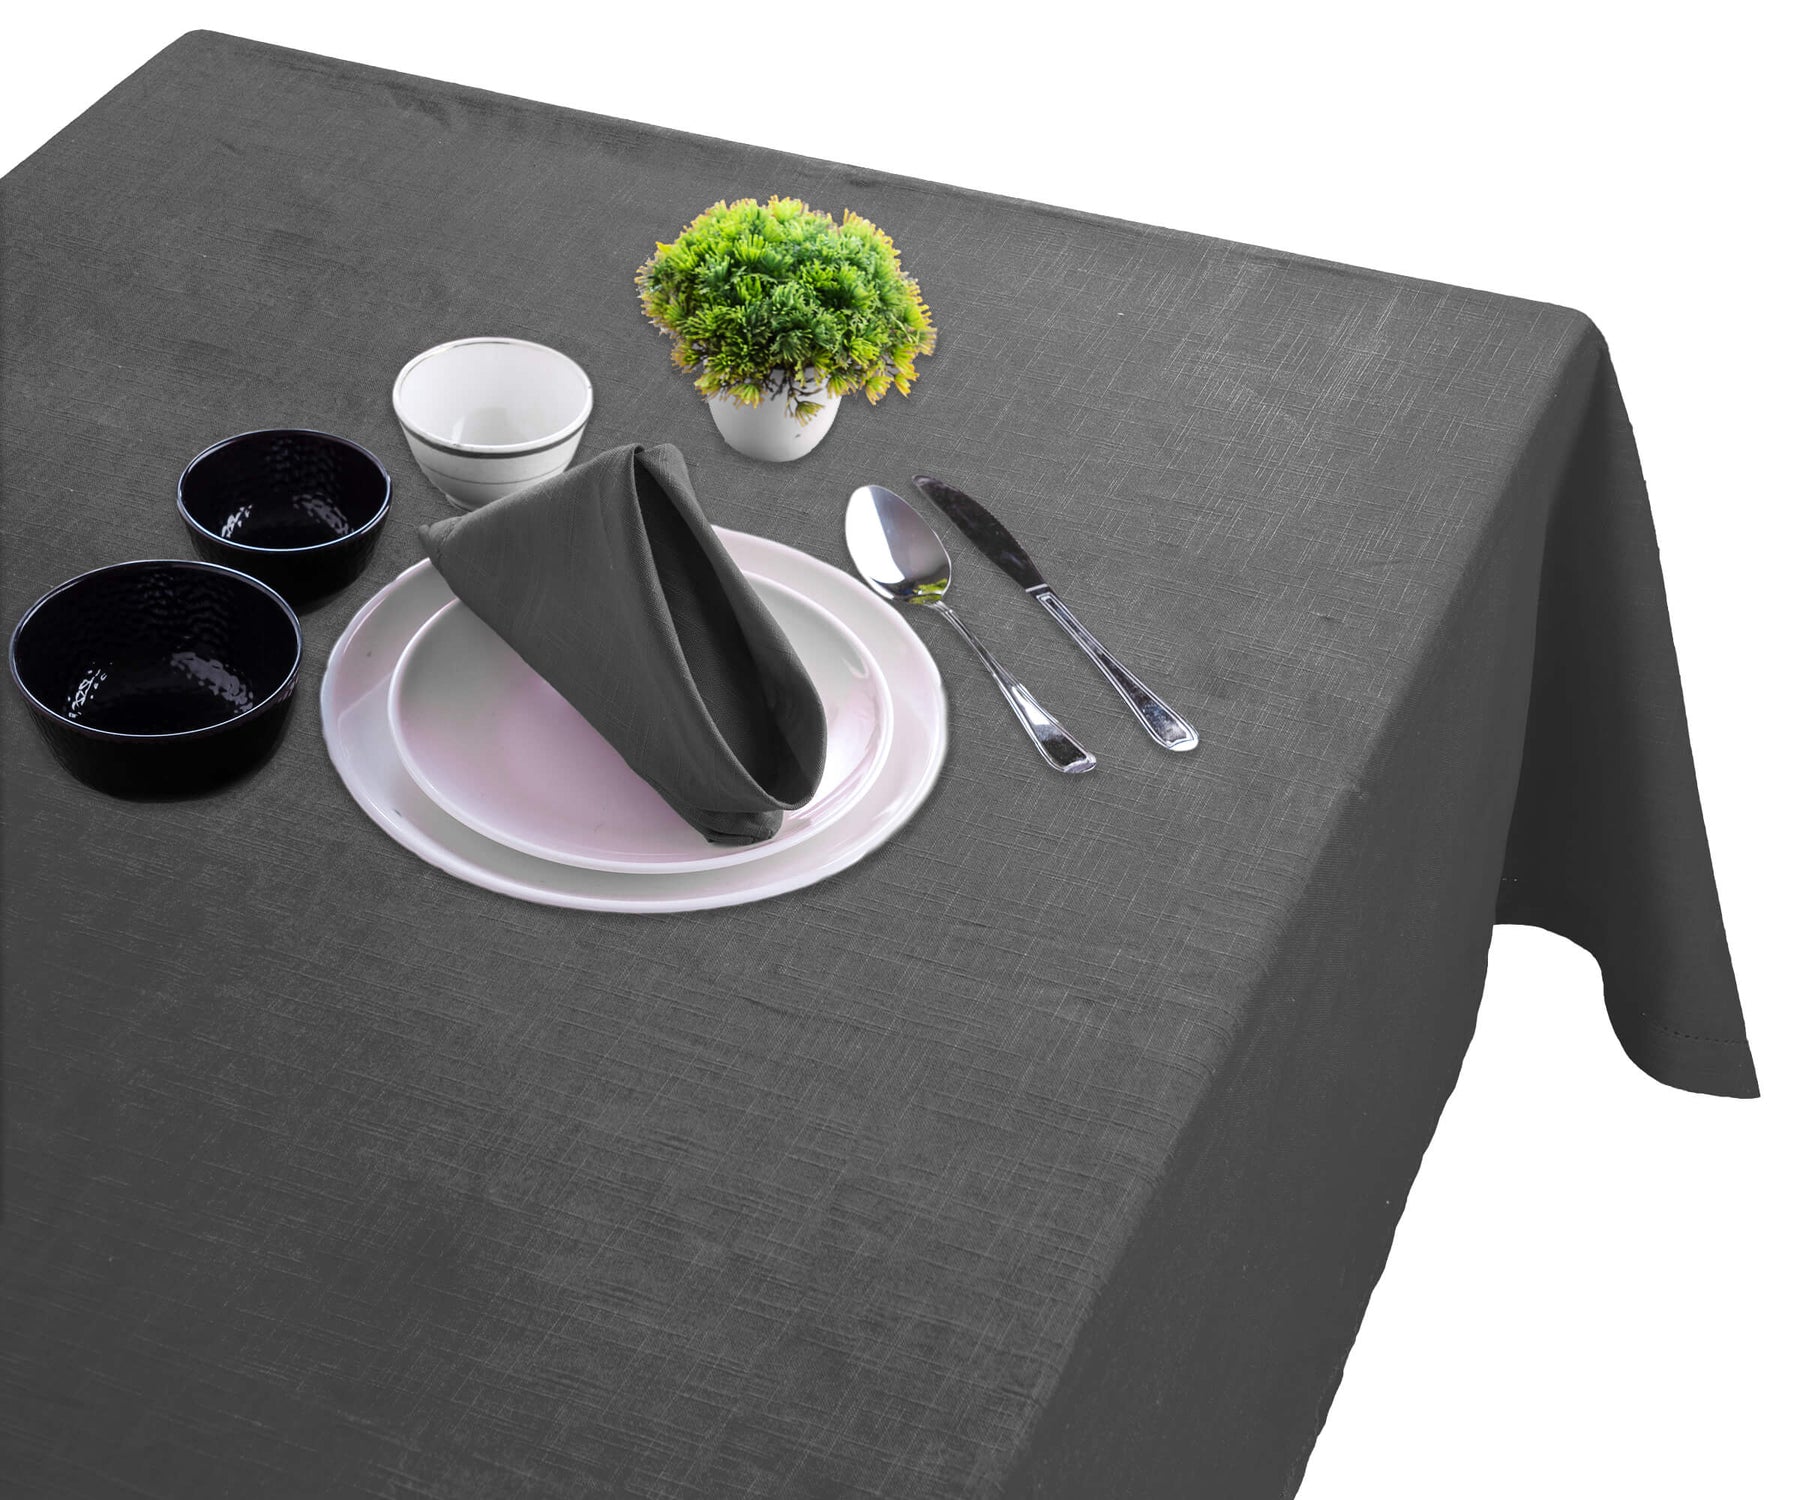 "Evoke sophistication with gray, embrace spring's liveliness, and celebrate holidays with our diverse tablecloth collection."